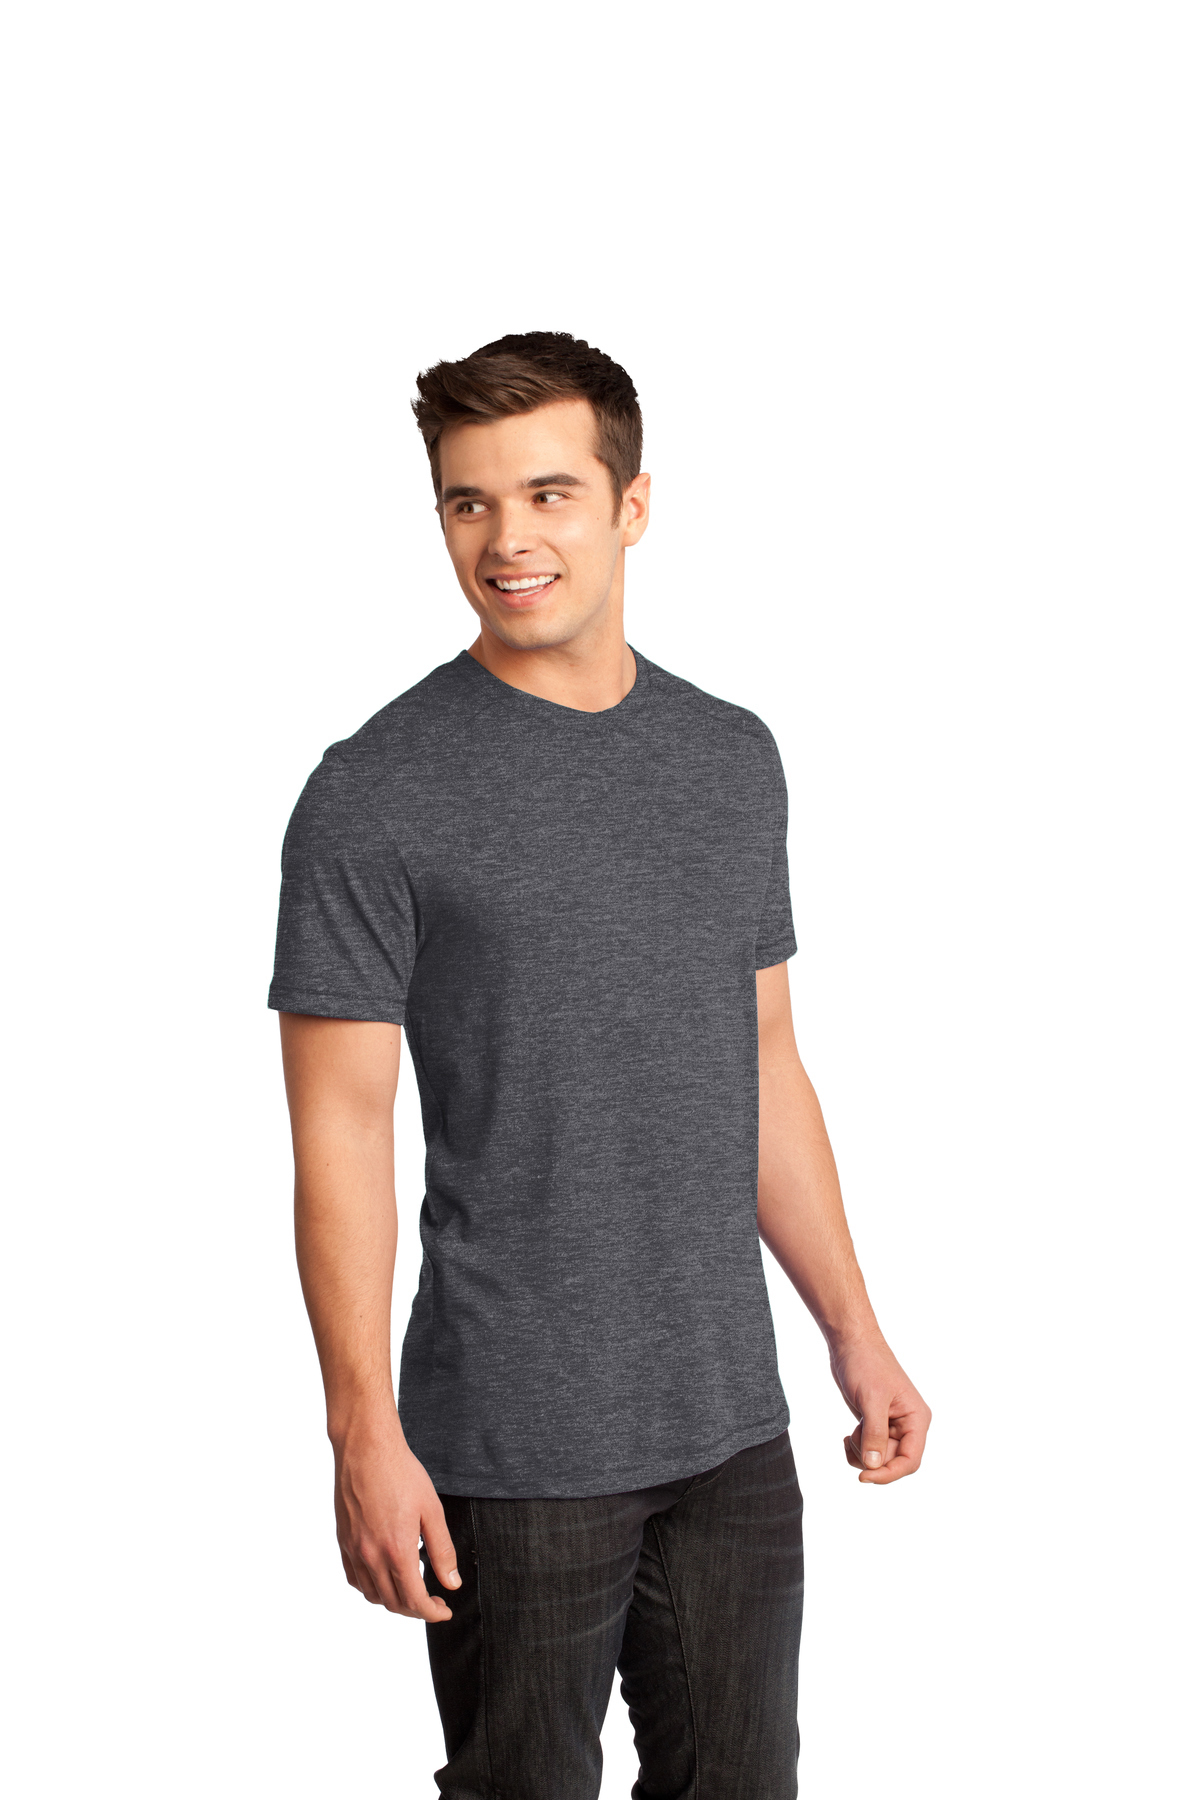 District - Young Mens Gravel 50/50 Notch Crew Tee | Product | SanMar